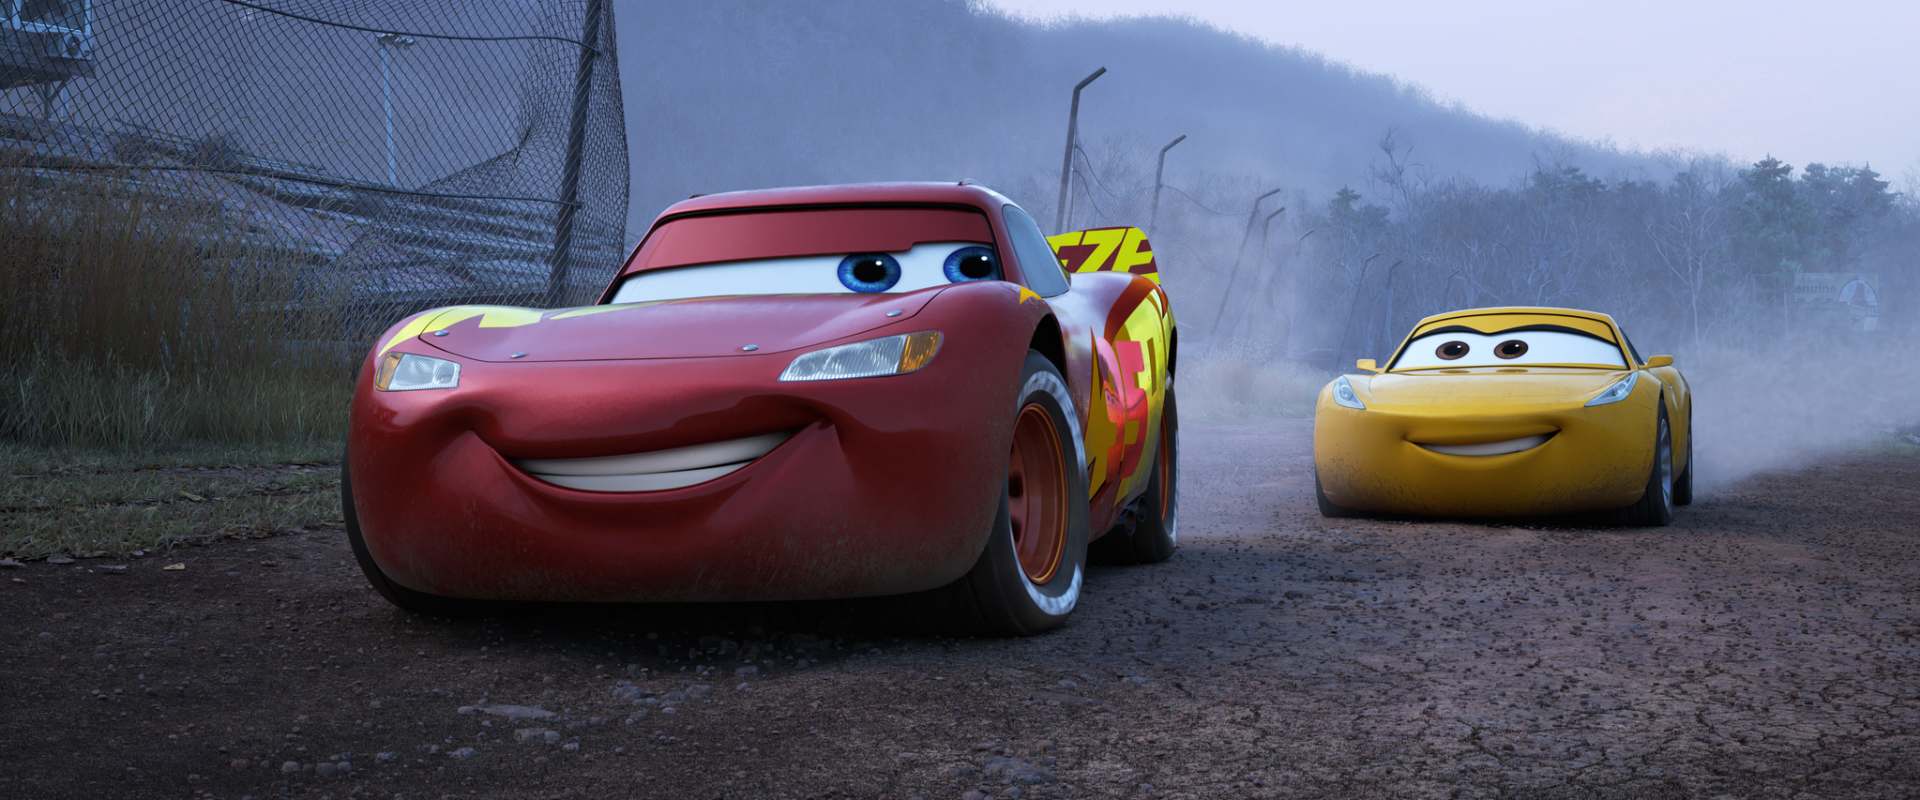 Cars 3 background 1